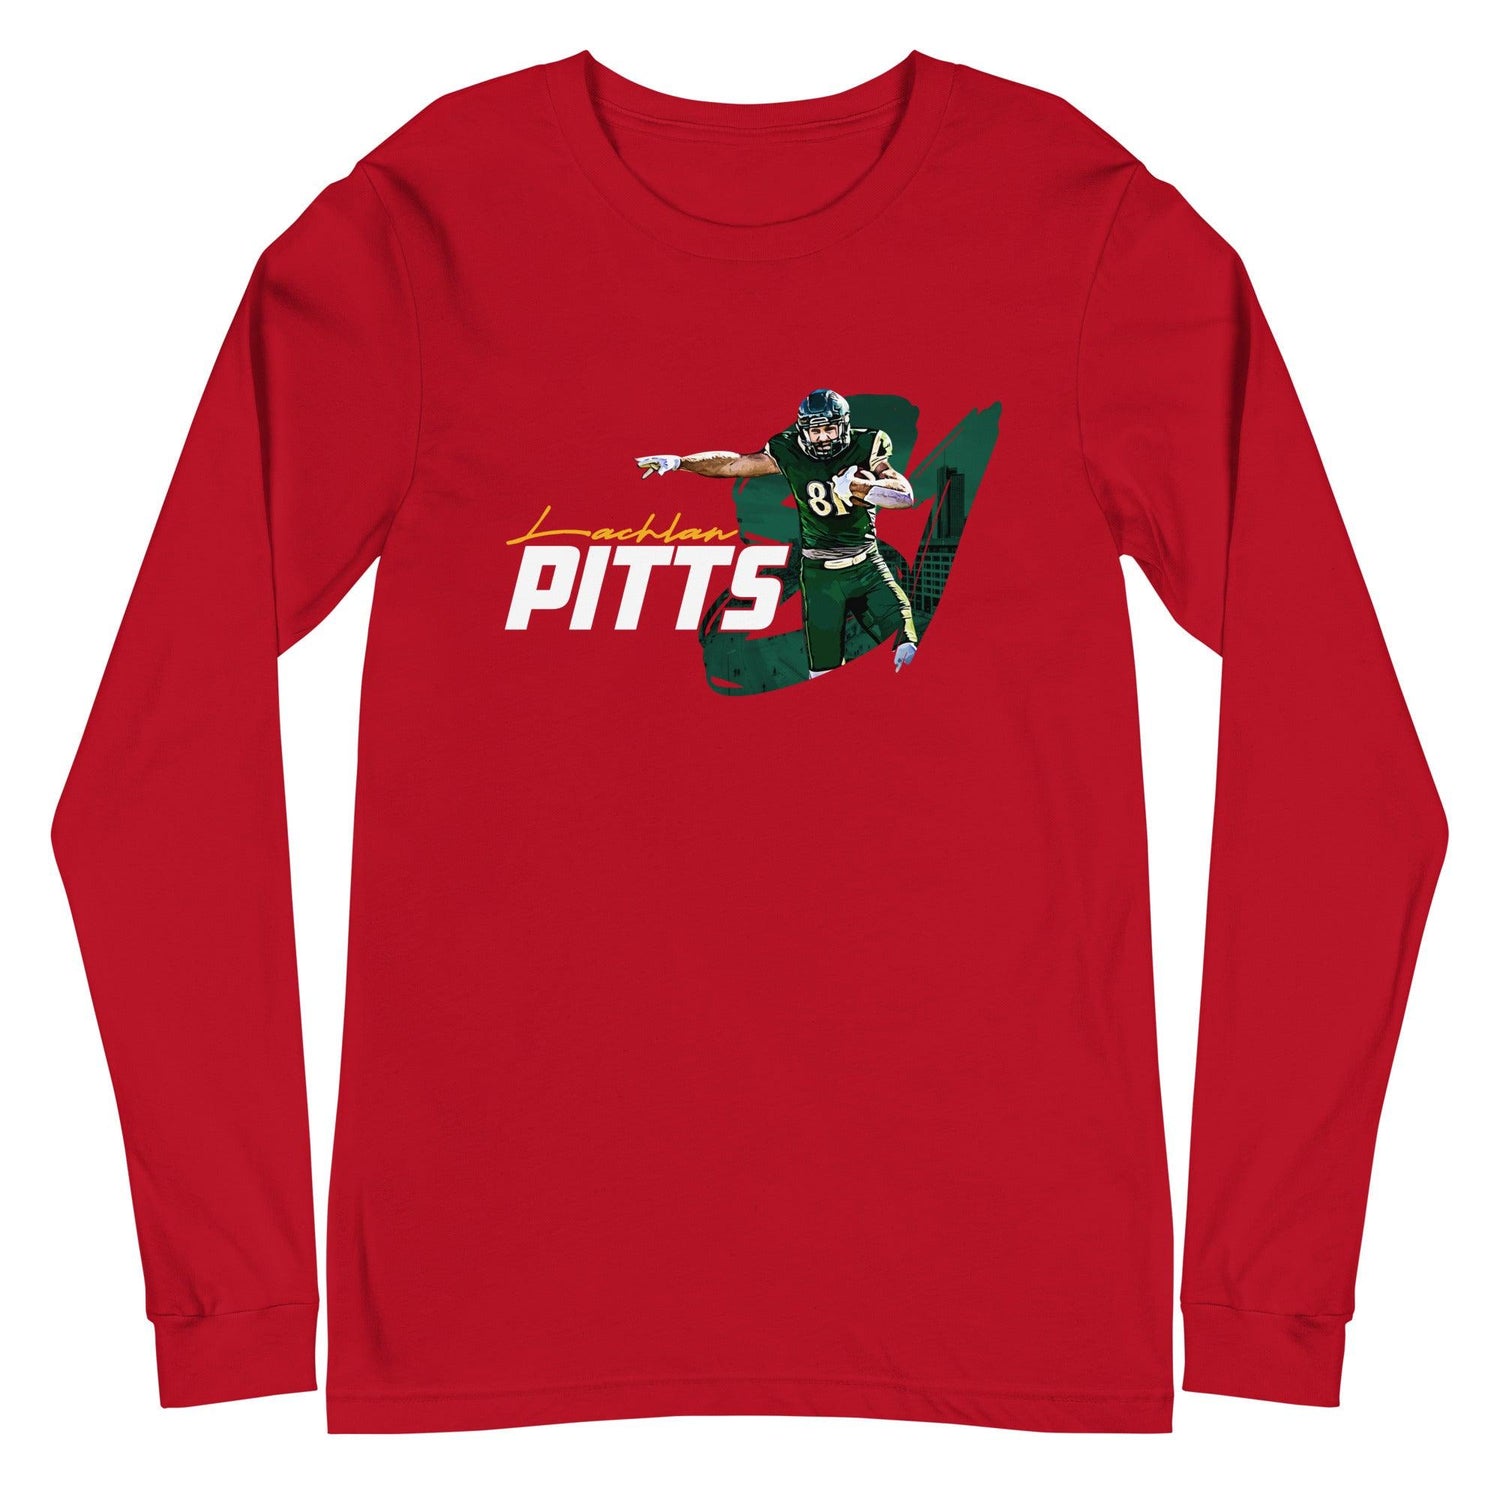 Lachlan Pitts "Gameday" Long Sleeve Tee - Fan Arch